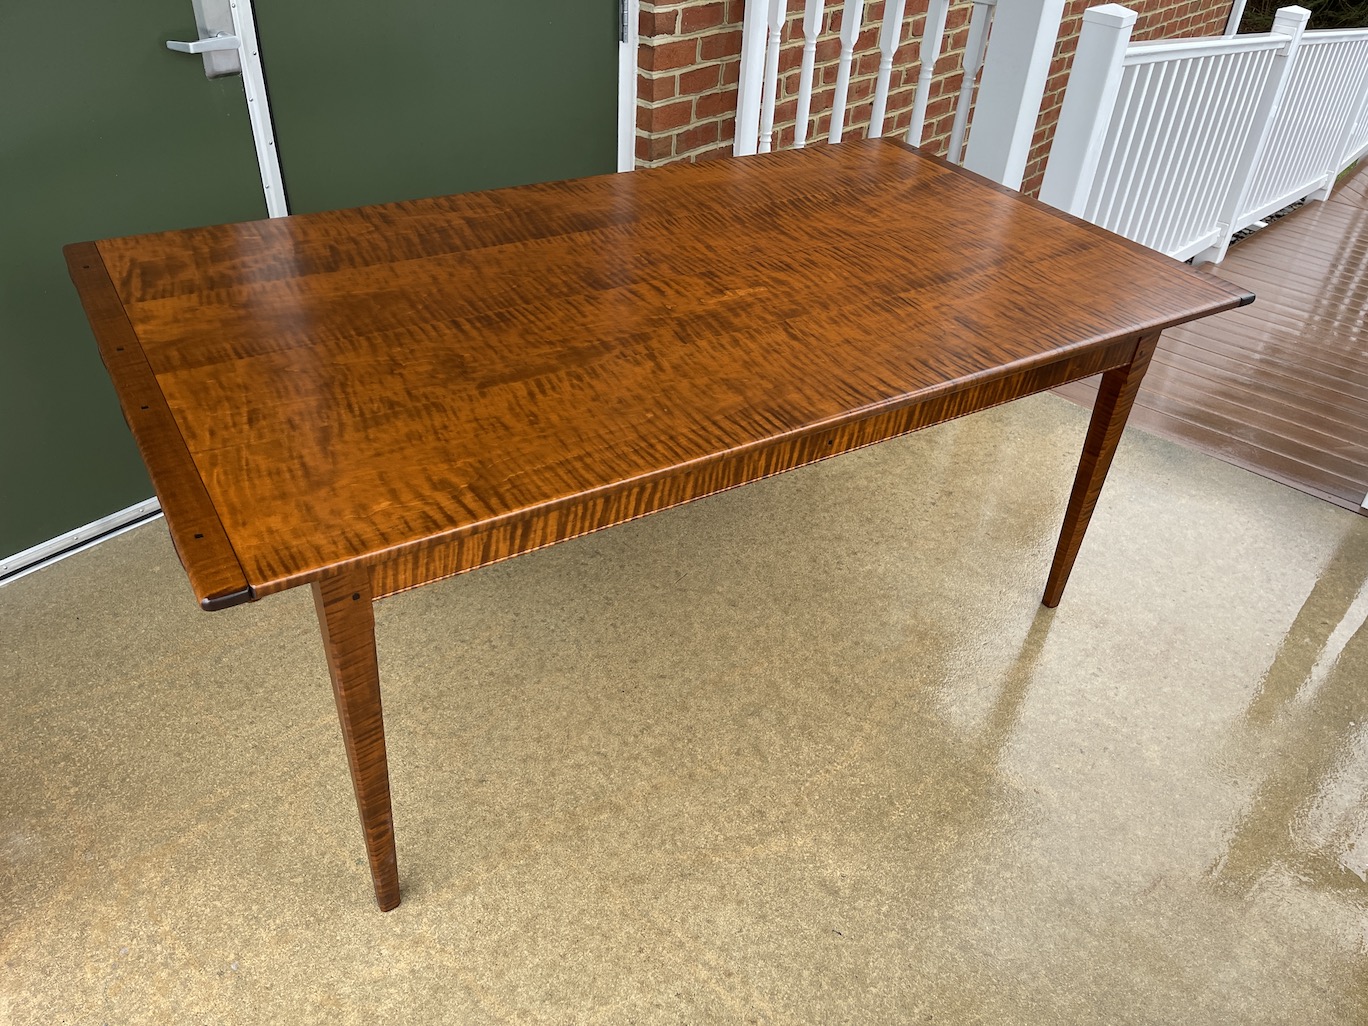 Great 6 ft X 40in Pennsylvania Farm Table Tiger Maple Wood Image